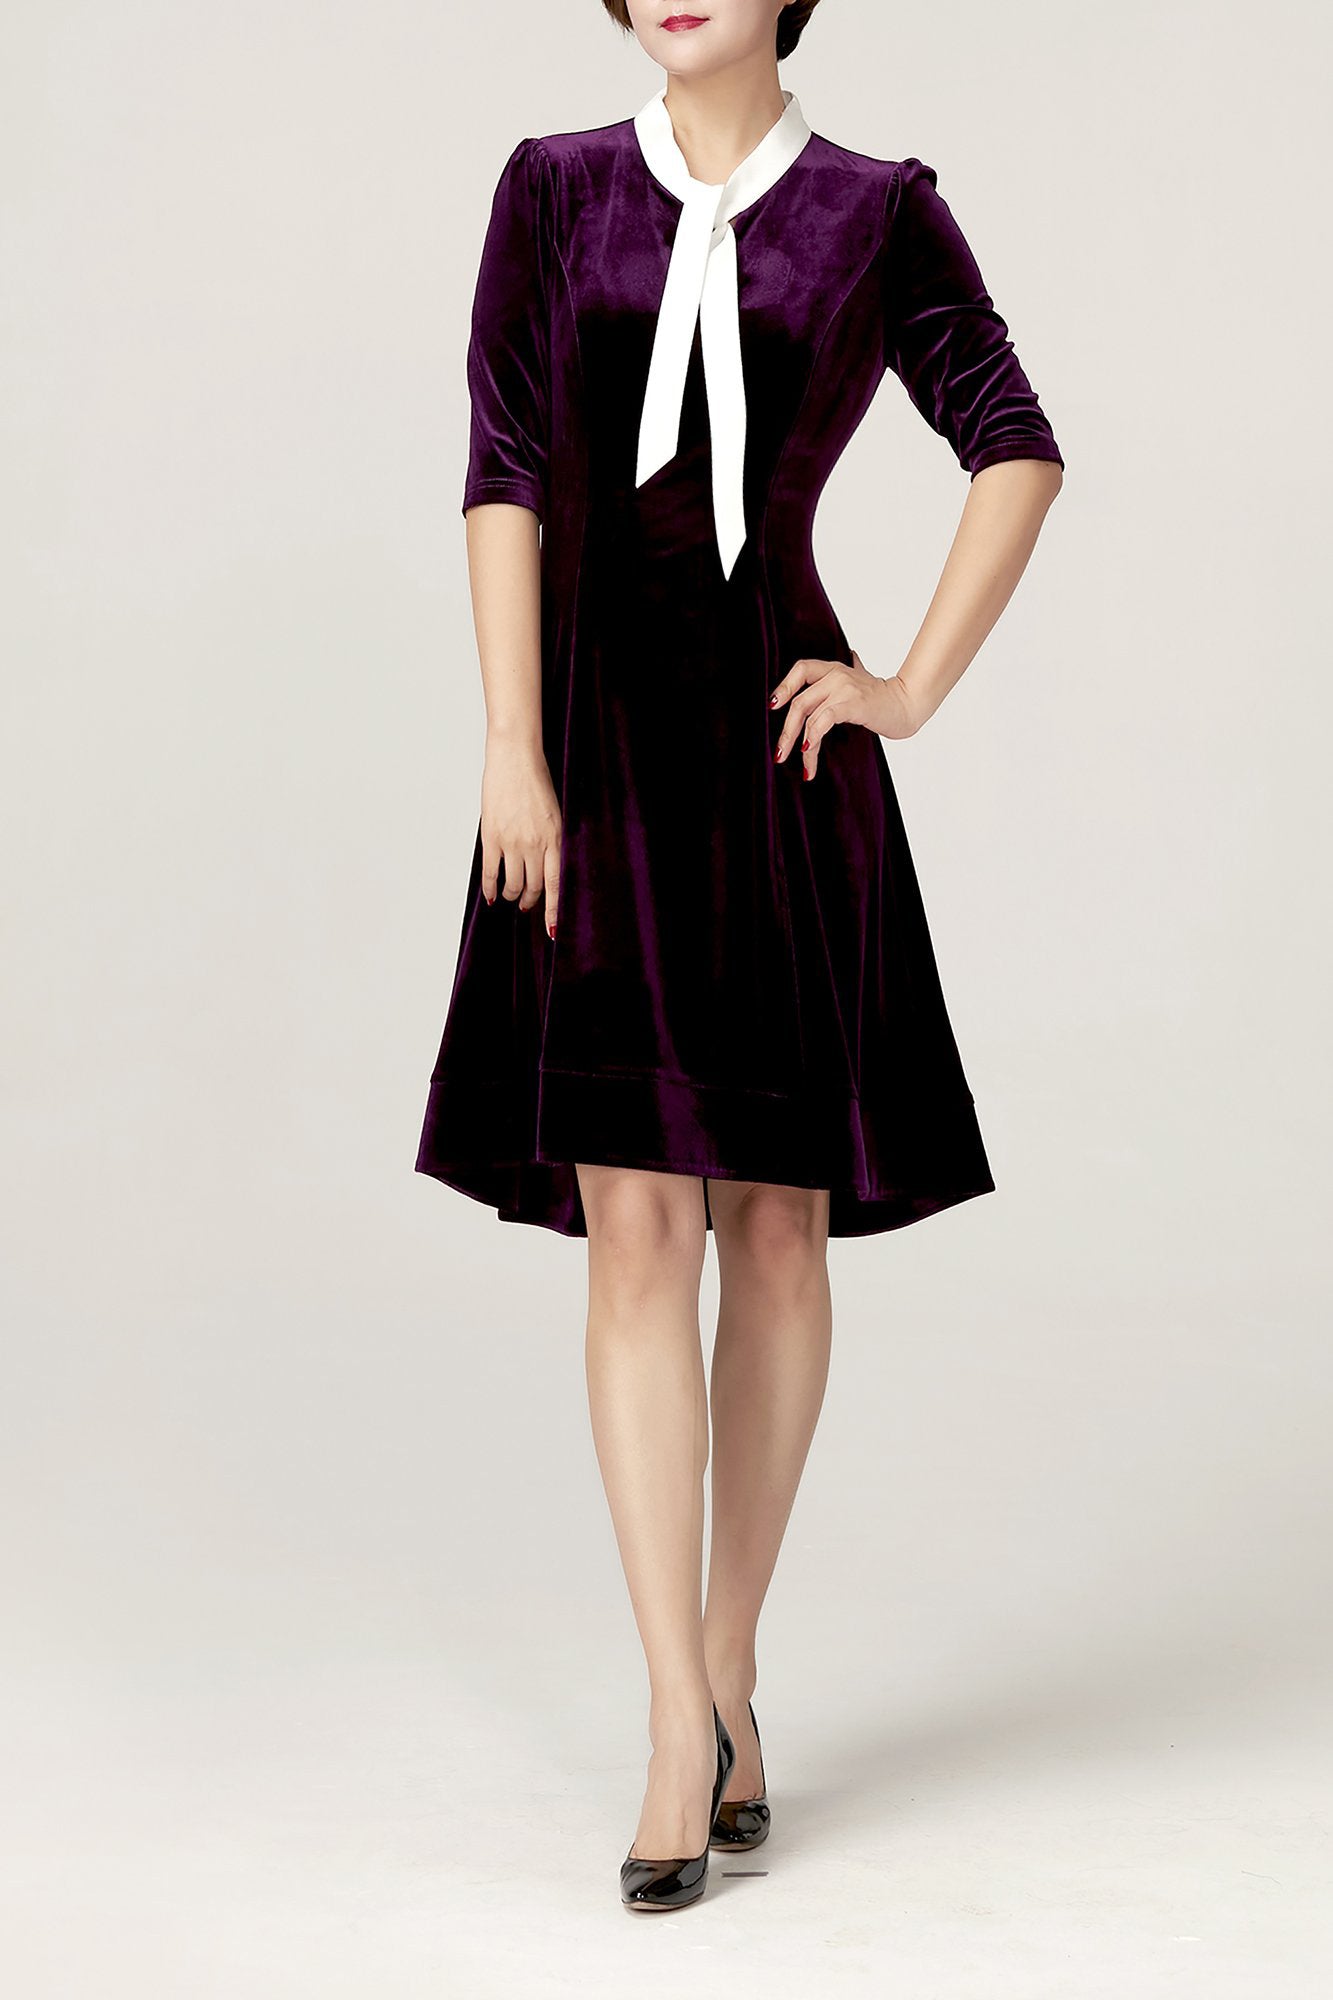 DL Forever Young Jessica Stretchy Velvet Dress - with White Neck Tie